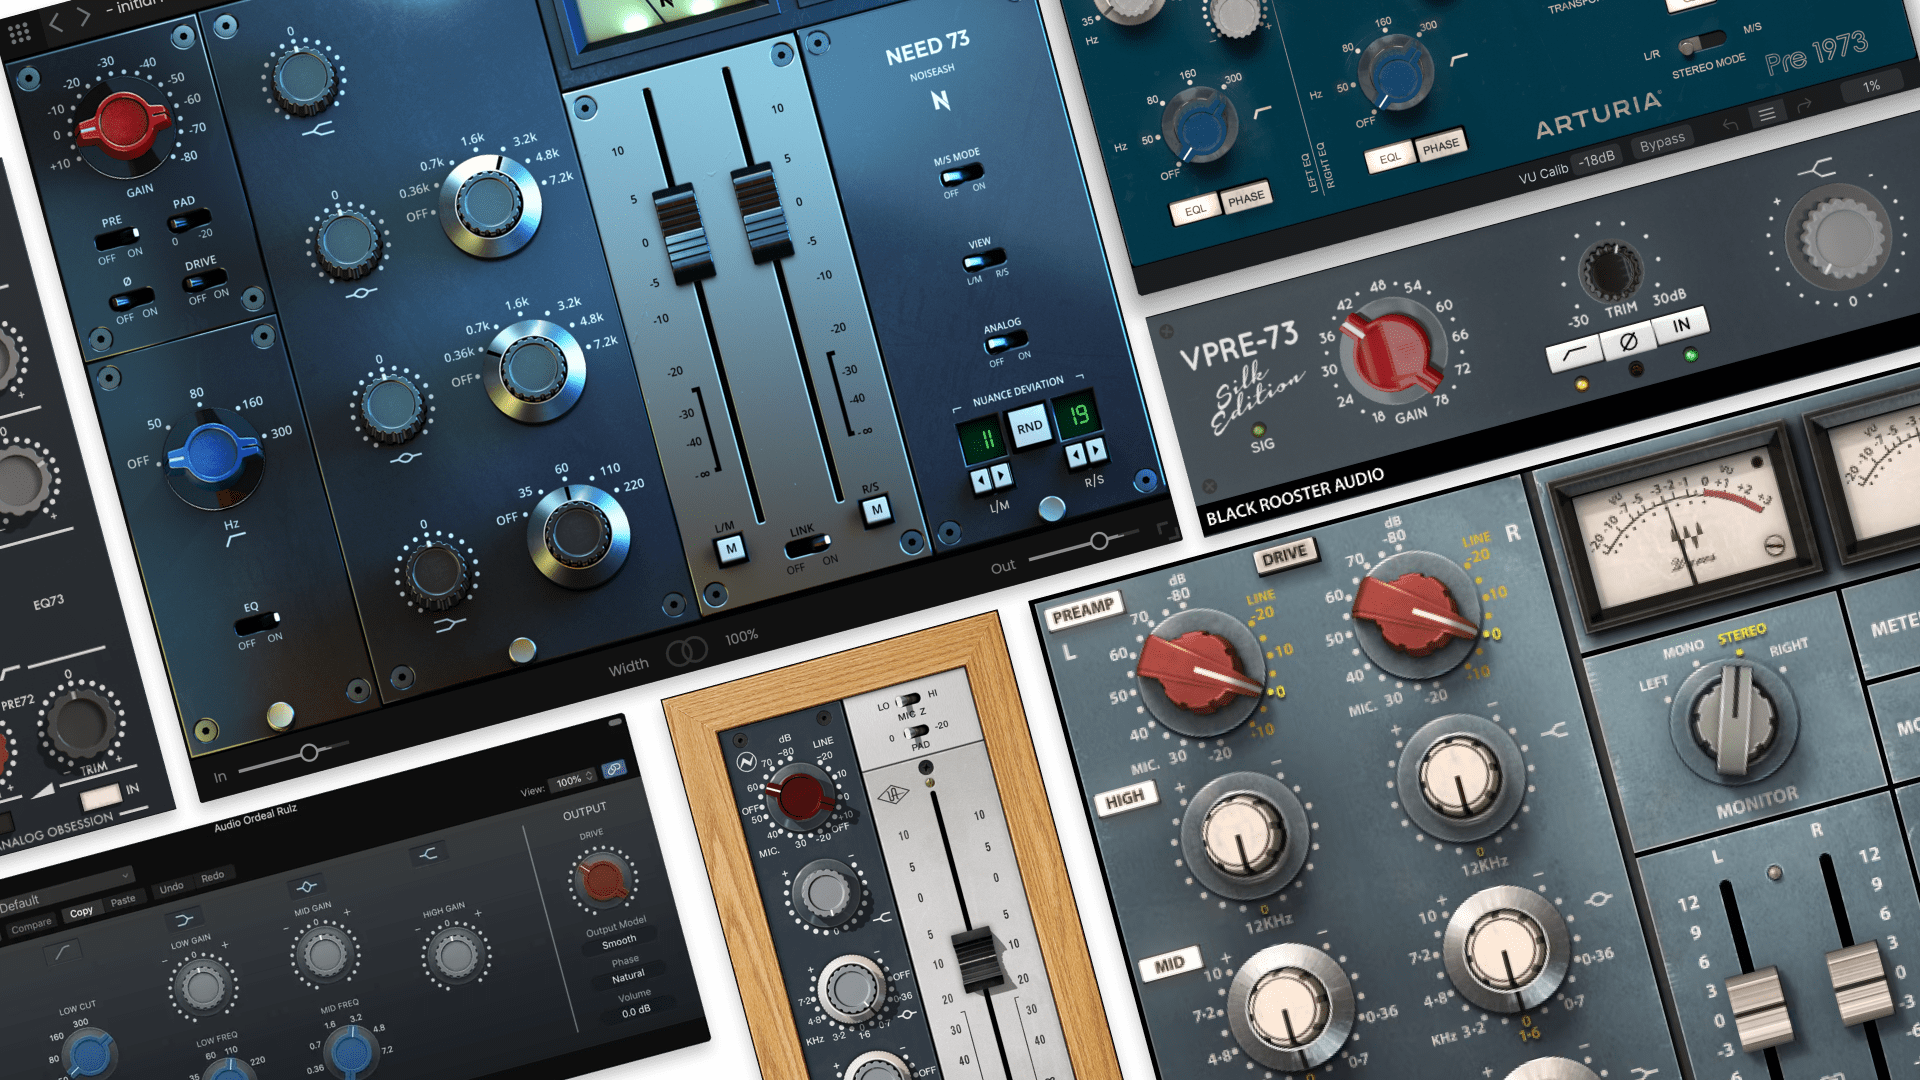 multiple interface with knobs, sliders and gages